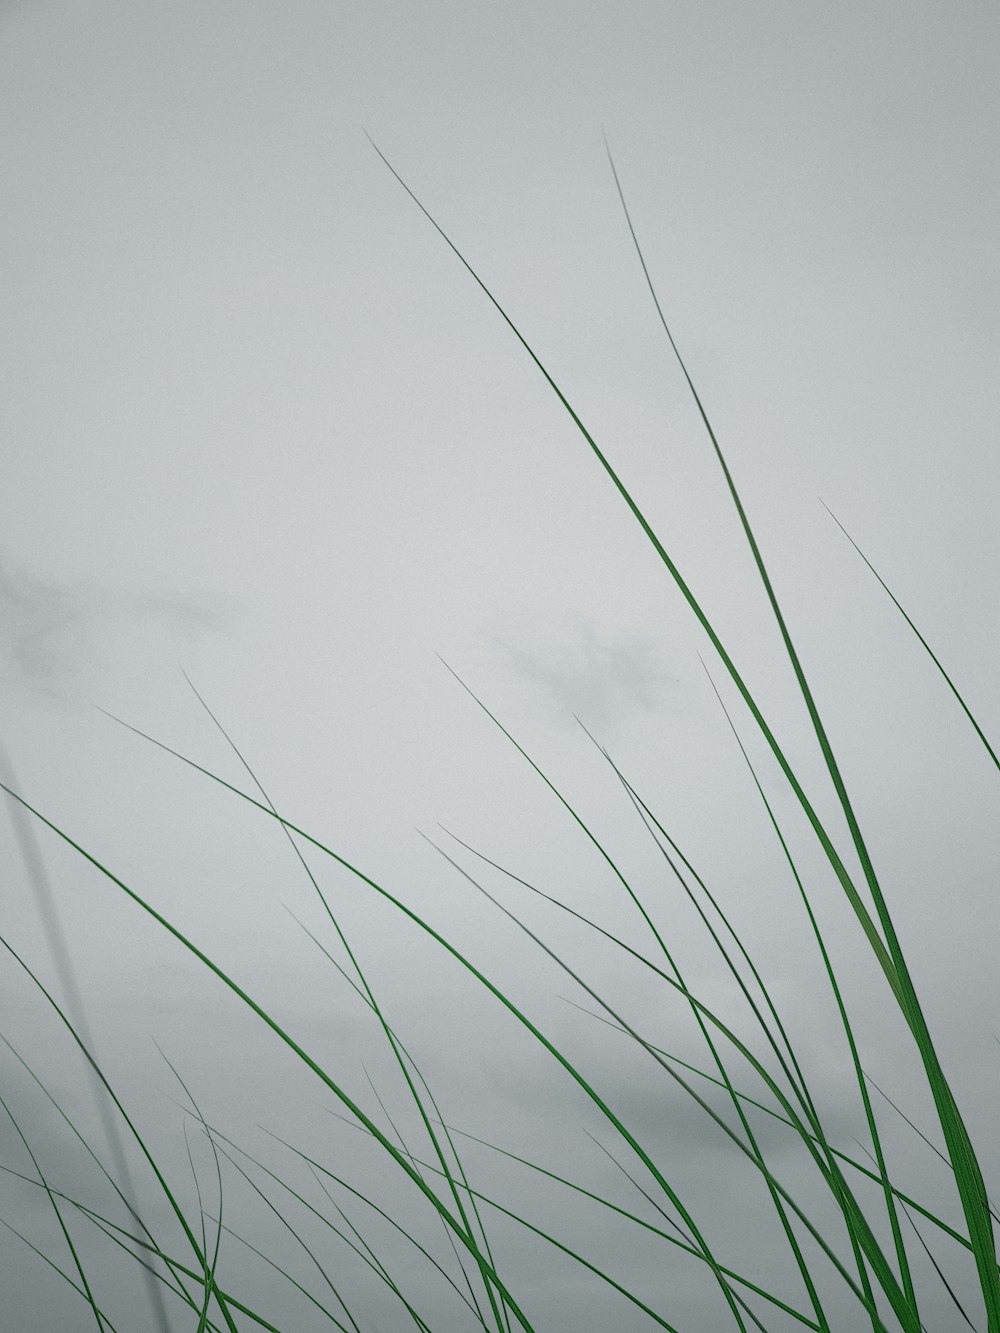 tall grass blowing in the wind on a foggy day